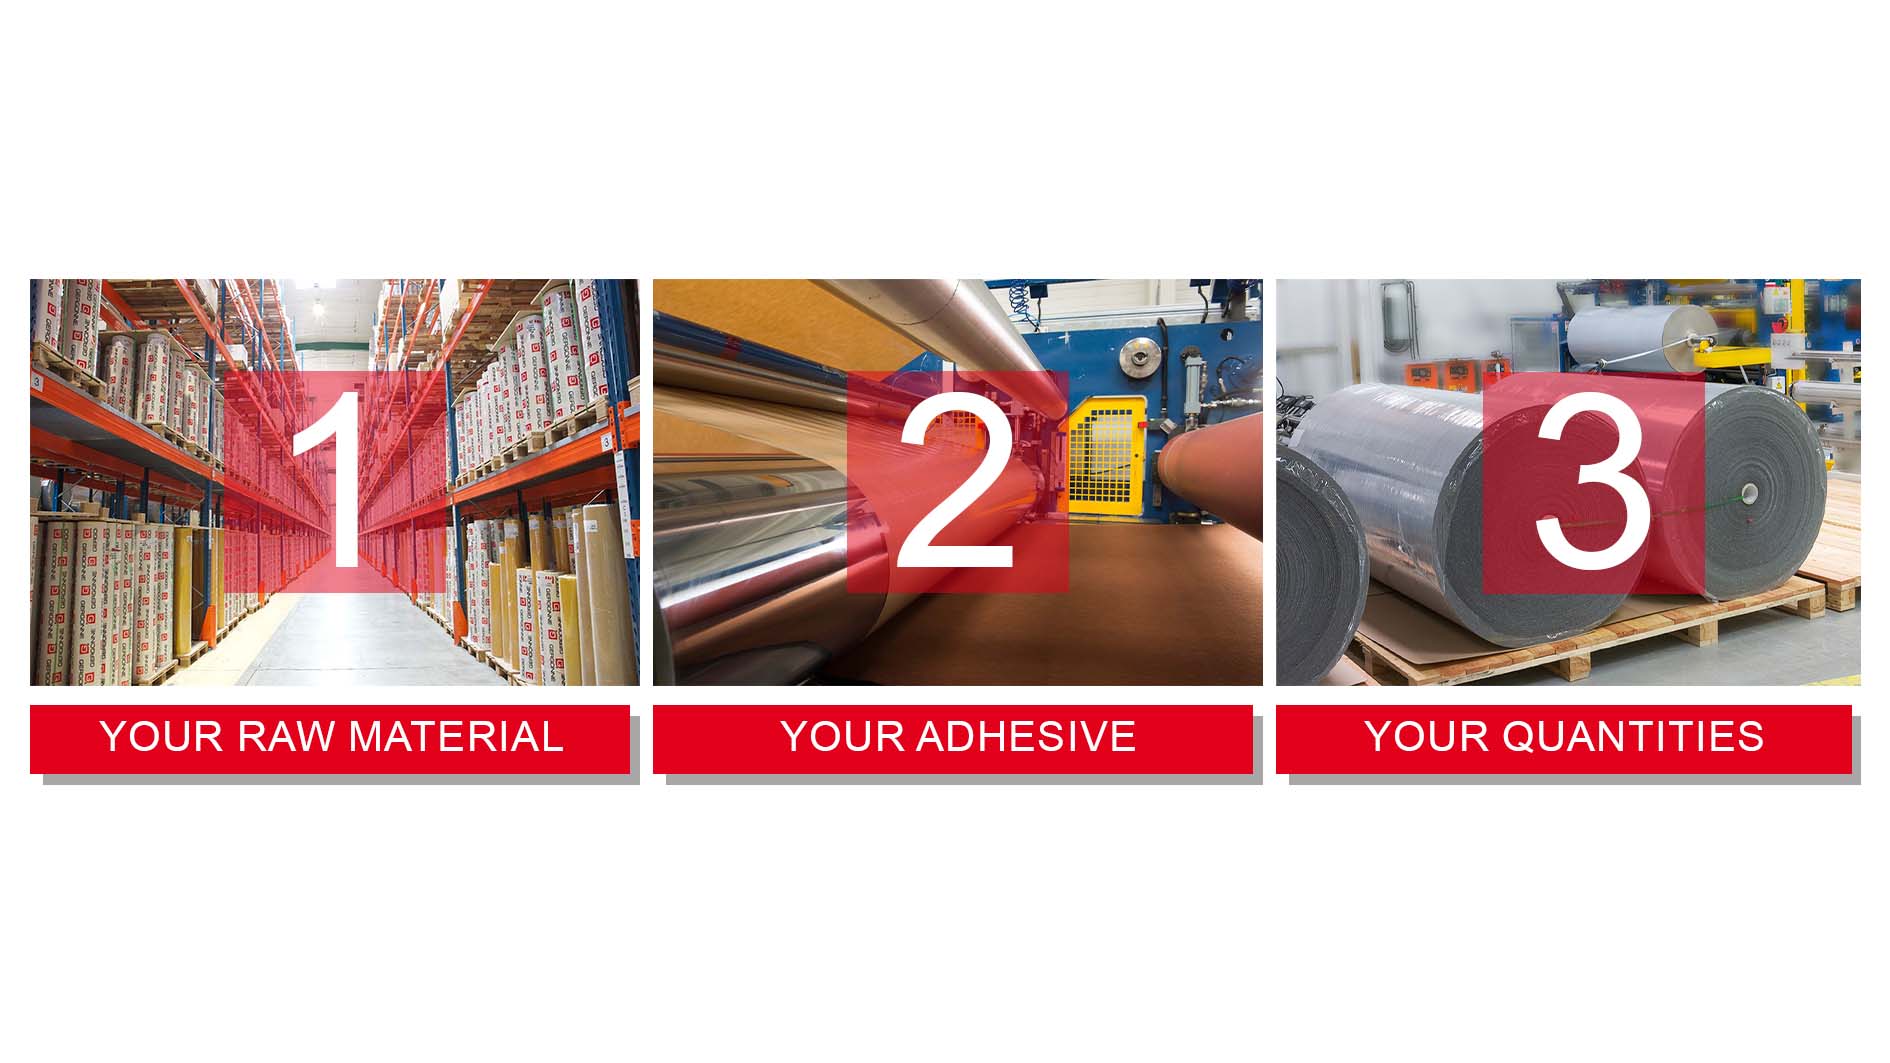 ENTRUST US WITH YOUR MATERIALS TO MAKE THEM SELF-ADHESIVE